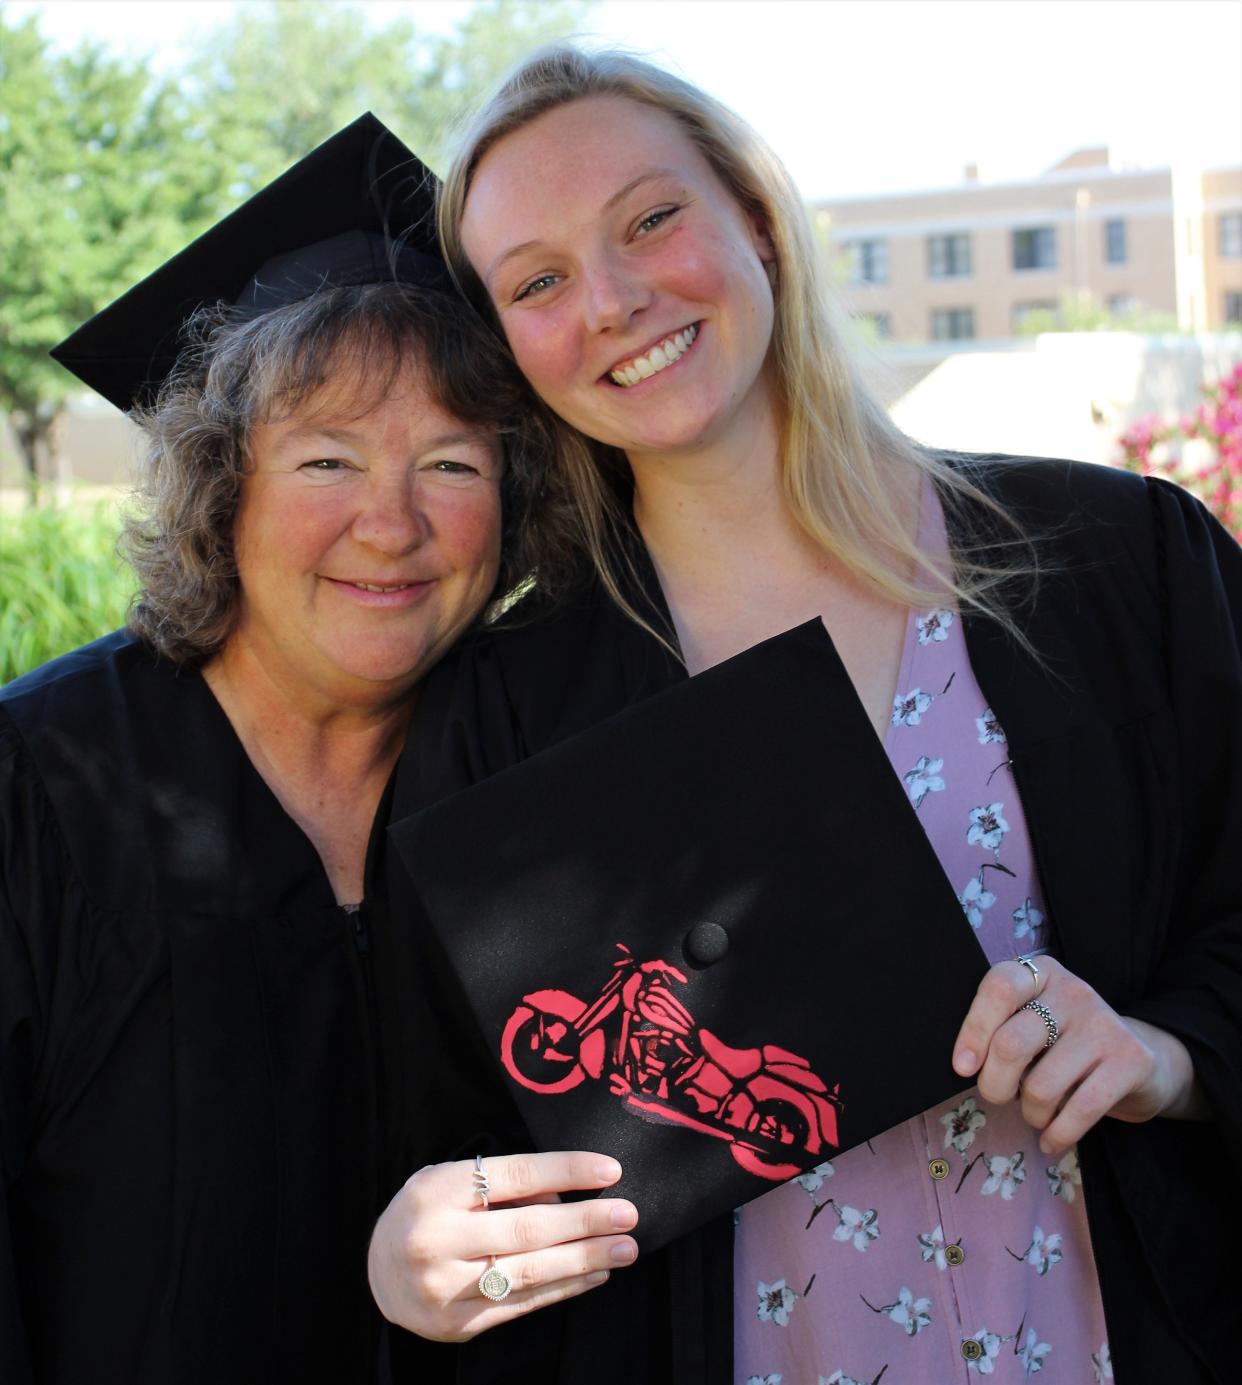 Melinda Roberson, left, with her daughter, Mandy on the McMurry University campus. They graduate together Saturday, both with degrees in accounting. Mom had to take 79 hours the past 18 months to catch up to Mandy, who is holding her mortar board with an image of a motorcycle that she painted. It honors Raymond "Pops" Roberson, her grandfather, who died last May.